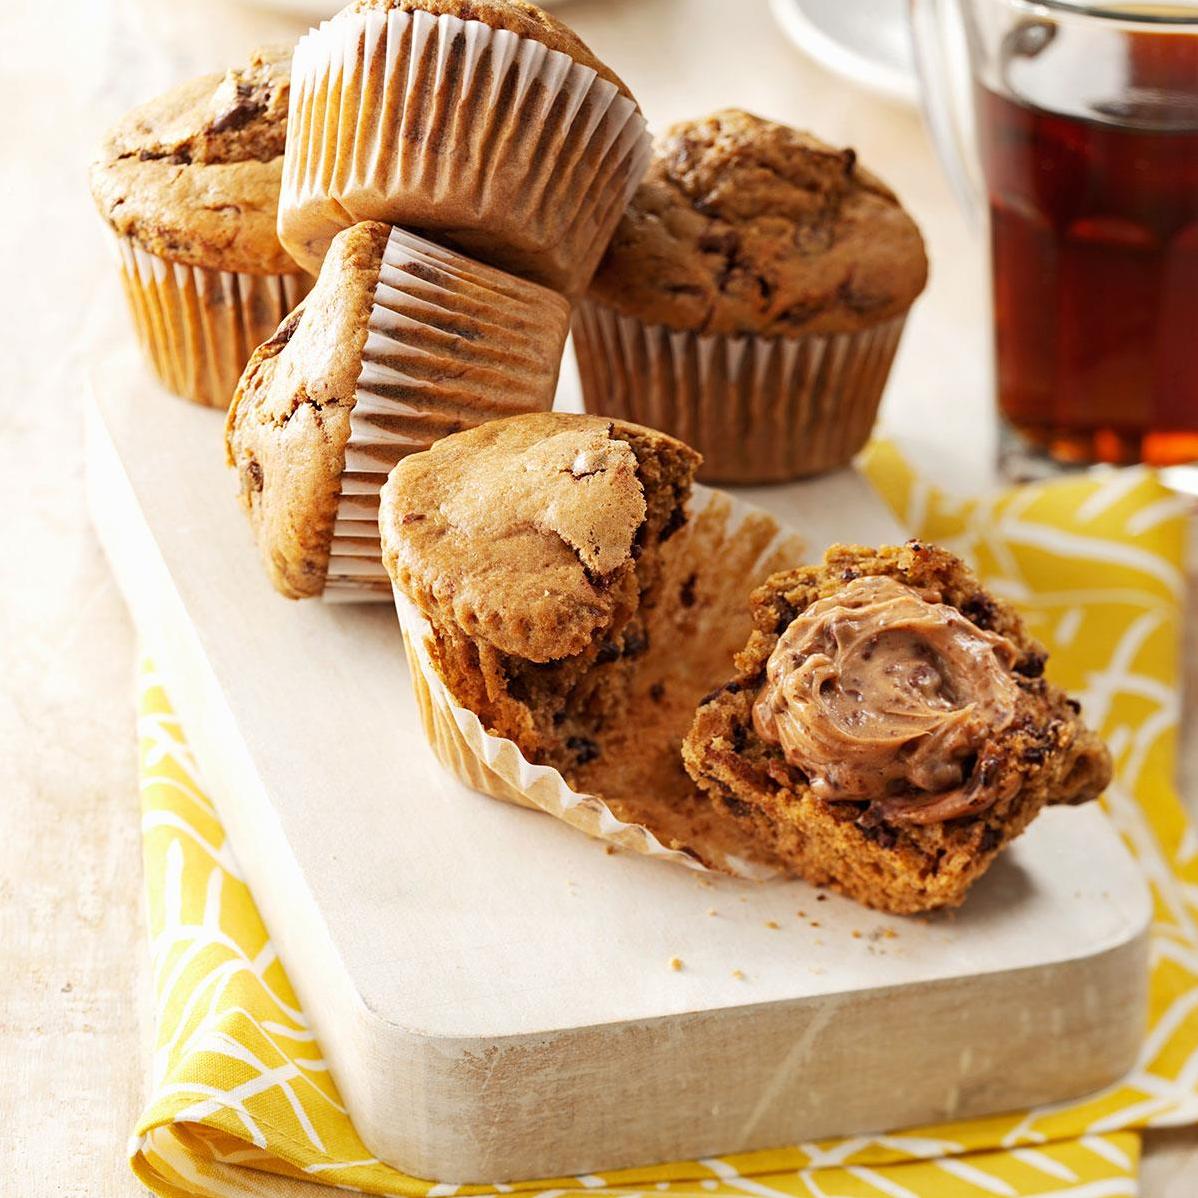  Perfect for breakfast on the go, a midday pick-me-up, or a sweet treat after dinner.